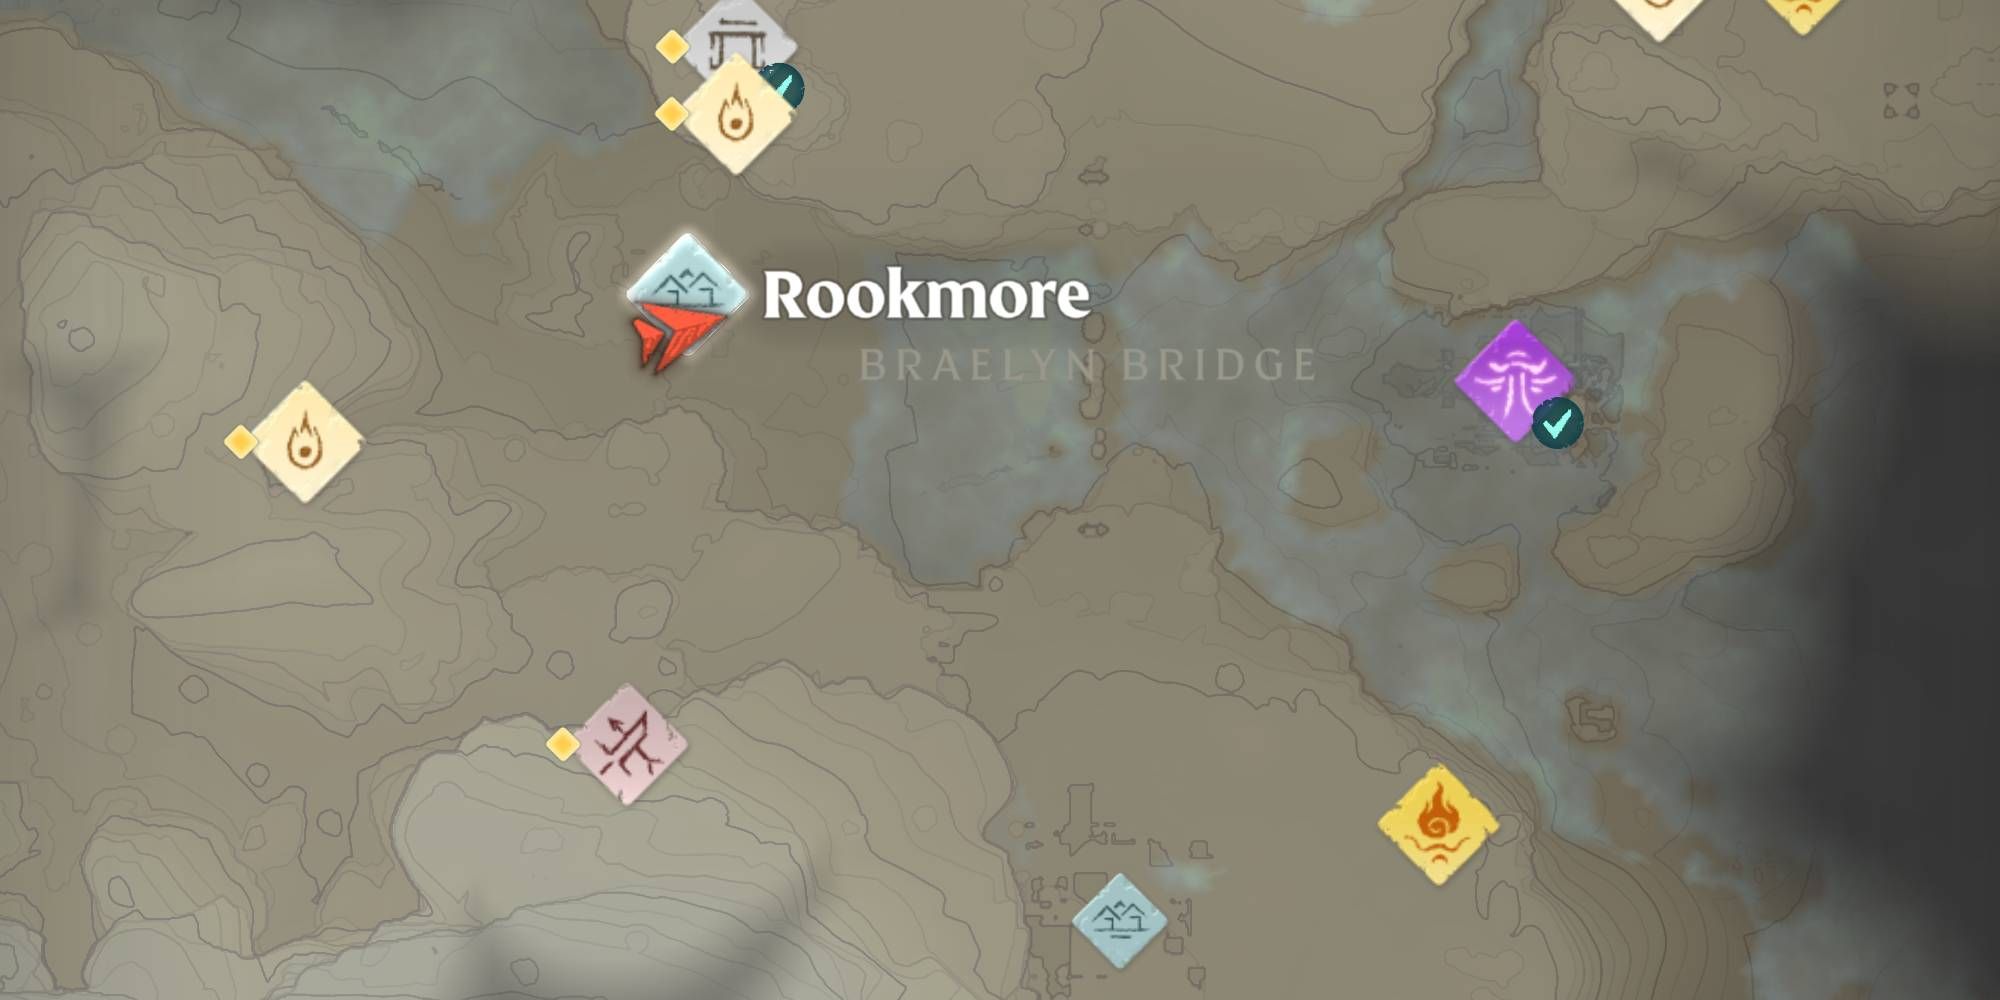 Rookmore